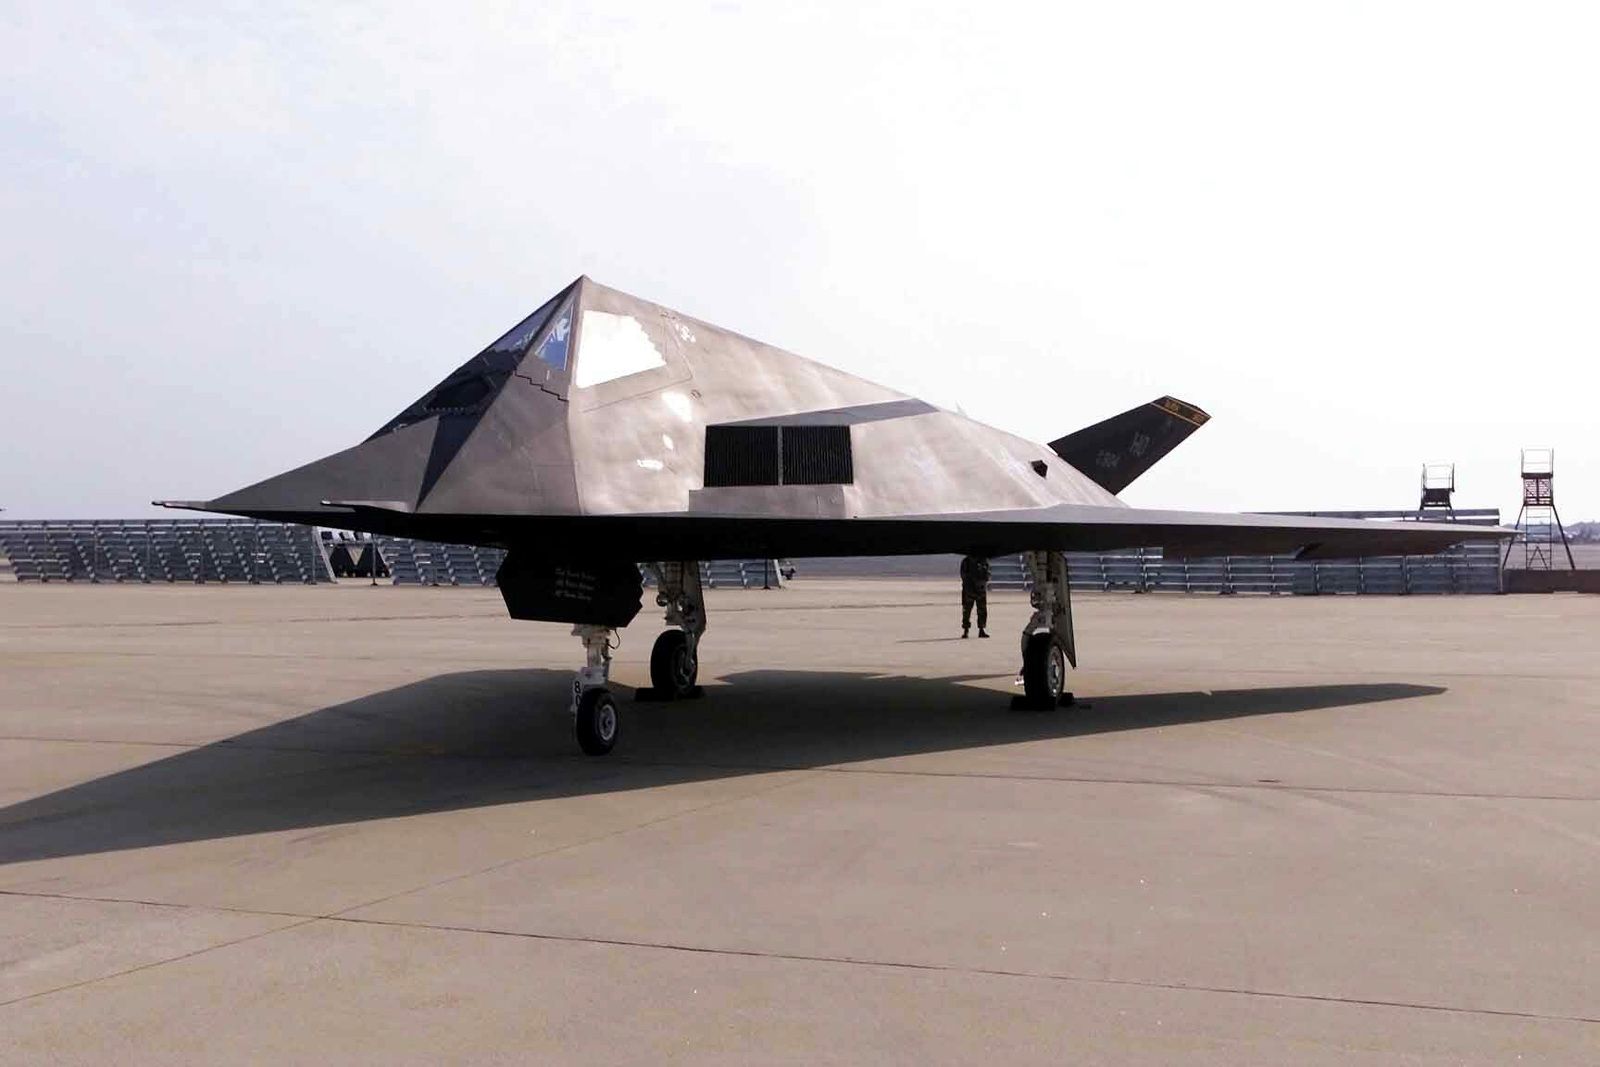 f-117a-nighthawk-stealth-fighter-attack-aircraft-on-static-display-in-support-87ccdf-1600